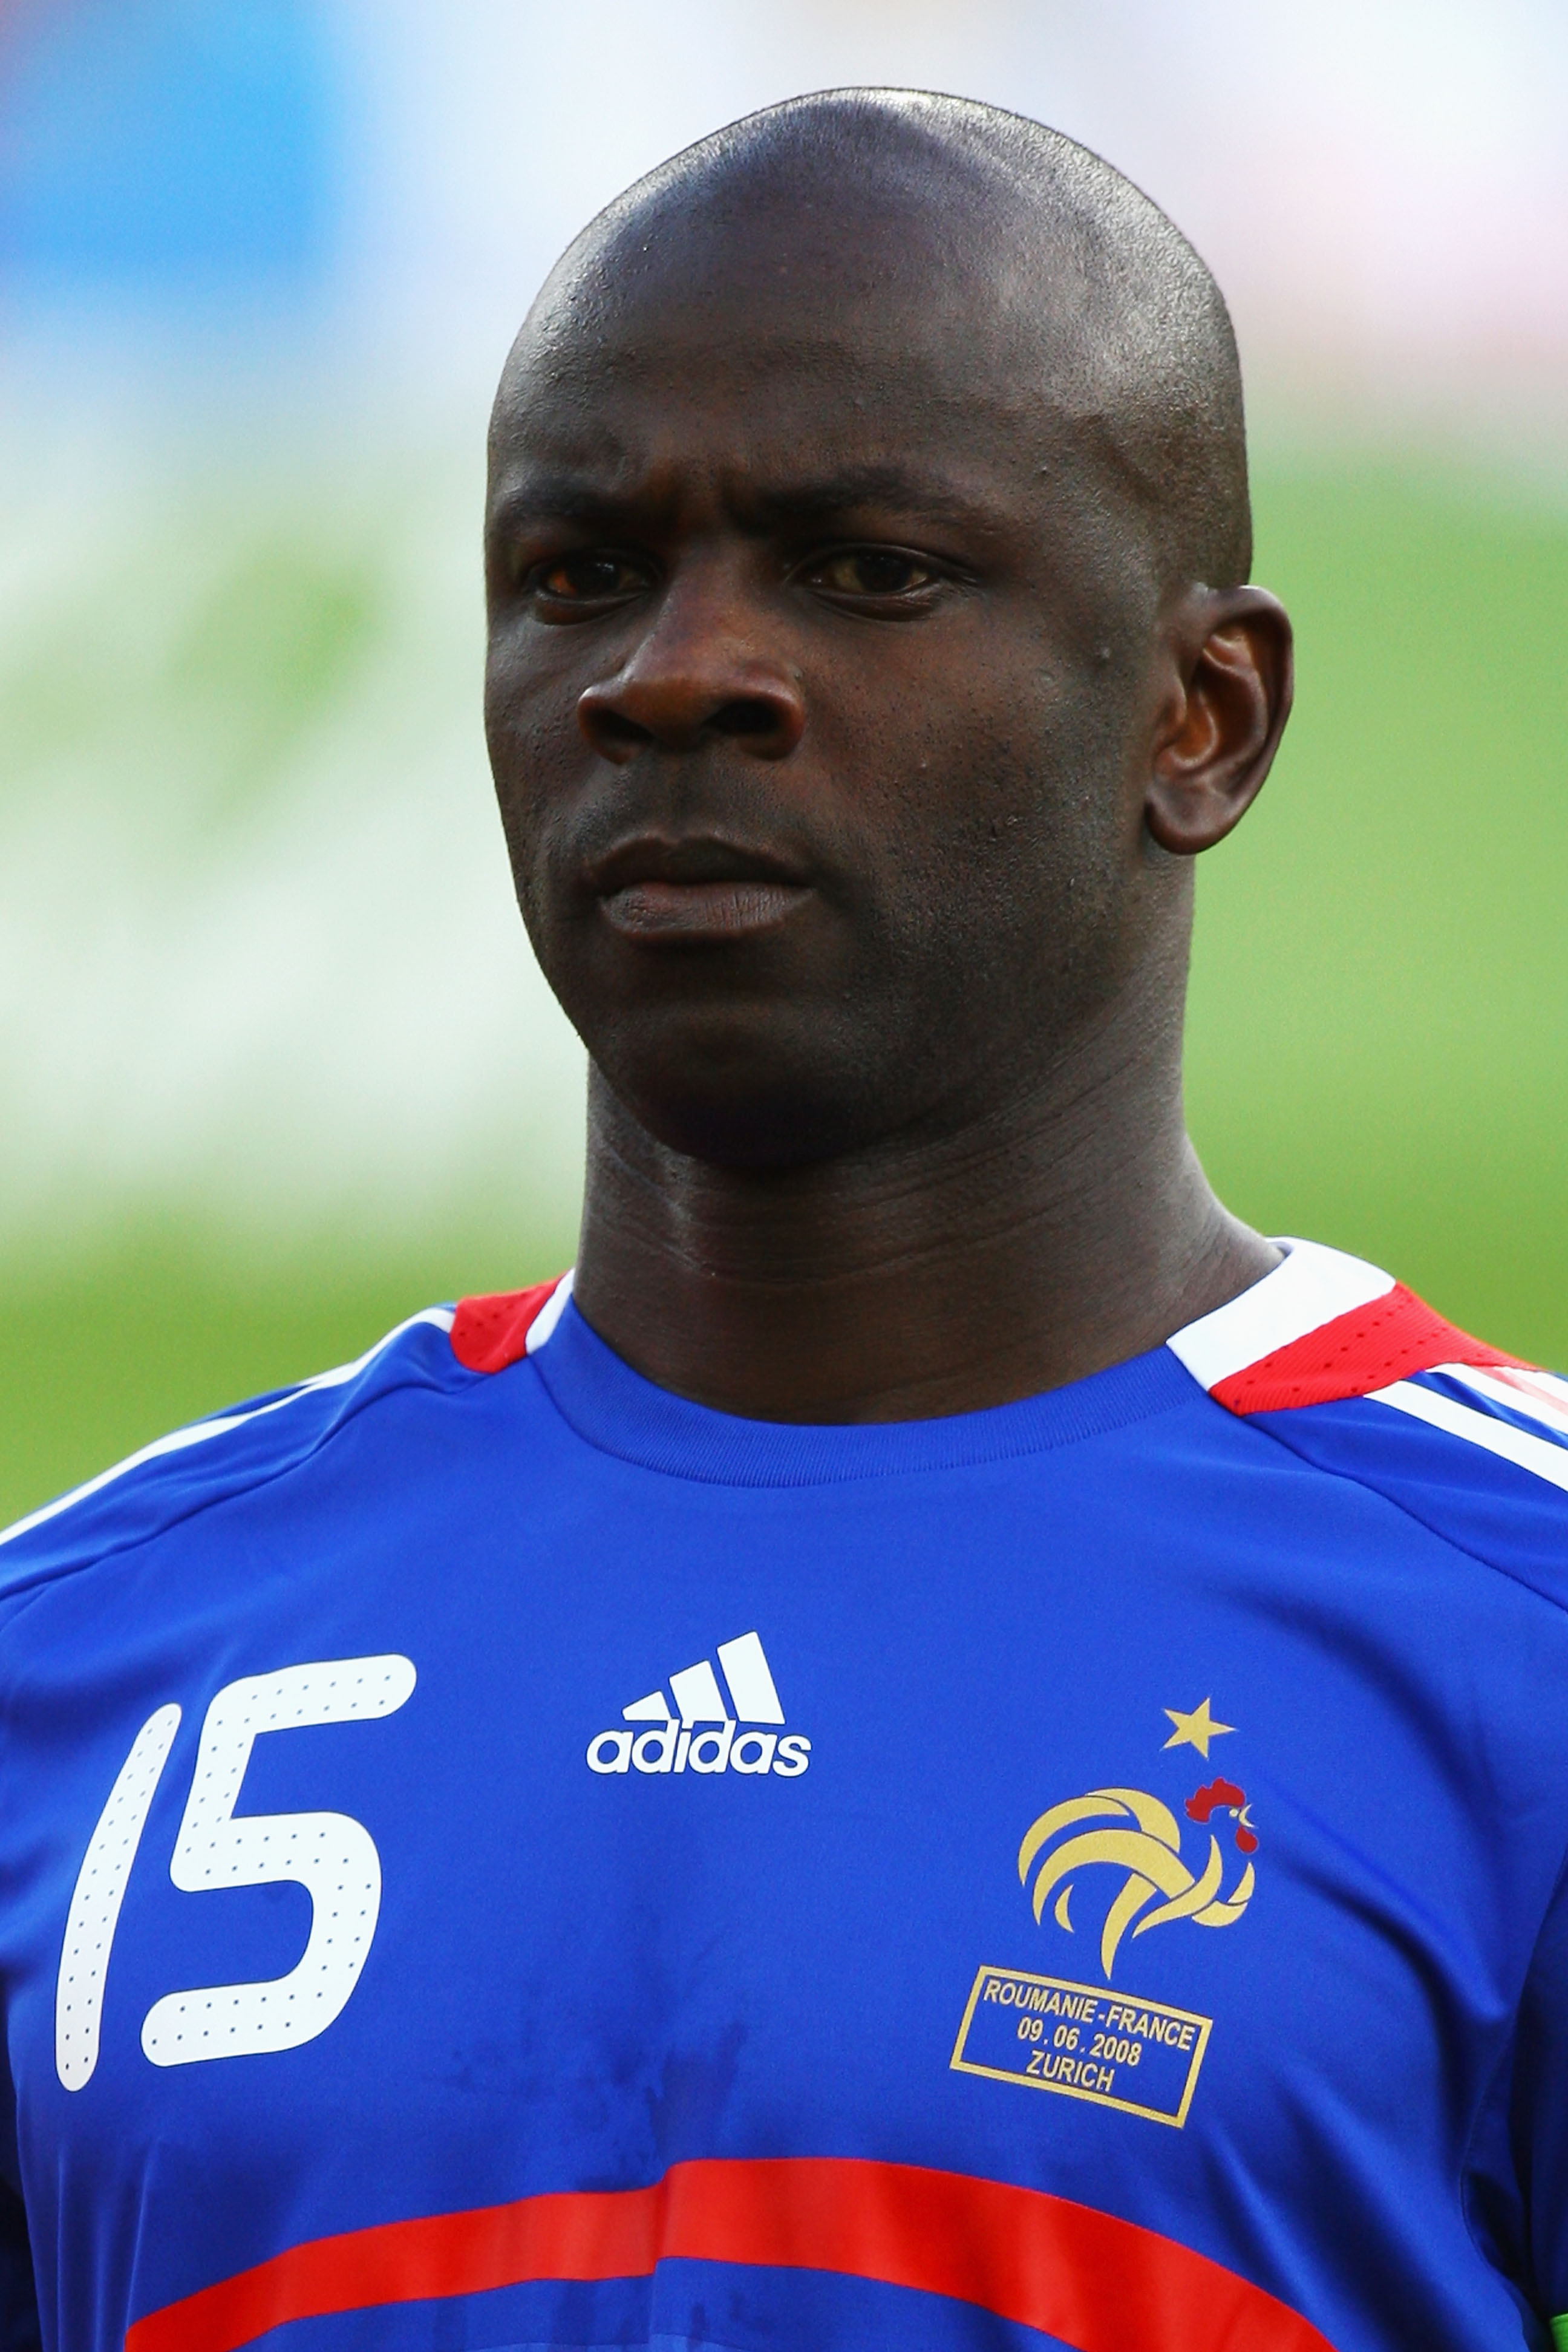 ZURICH, SWITZERLAND - JUNE 09: Lilian Thuram of France looks on during the UEFA EURO 2008 Group C match between Romania and France at Letzigrund Stadion on June 9, 2008 in Zurich, Switzerland.  (Photo by Ian Walton/Getty Images)